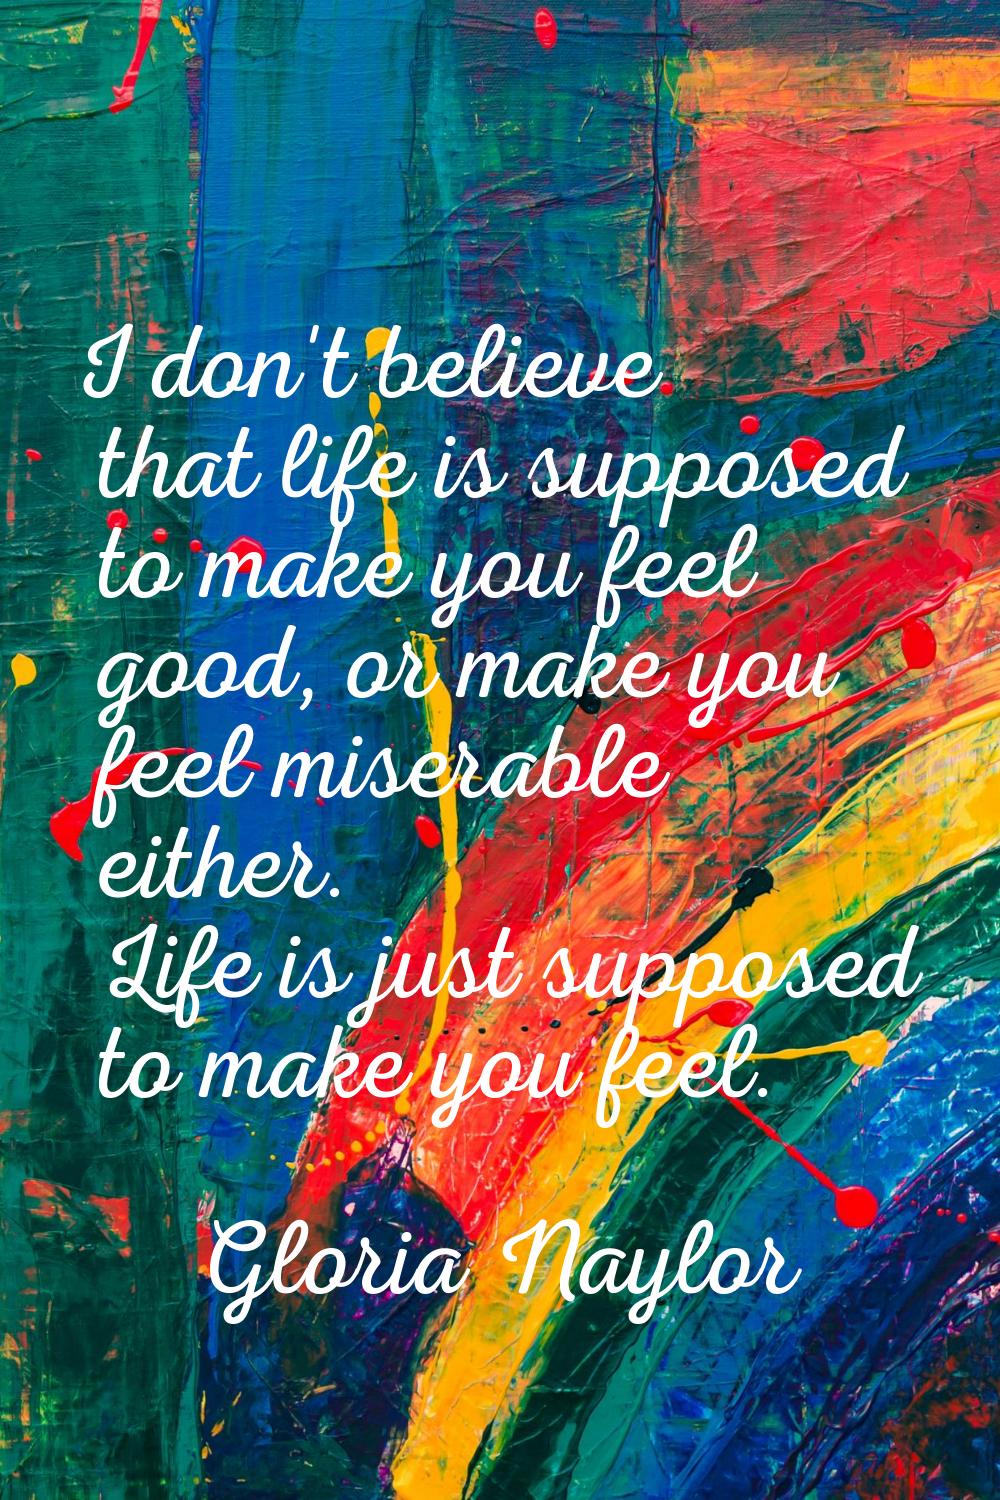 I don't believe that life is supposed to make you feel good, or make you feel miserable either. Lif